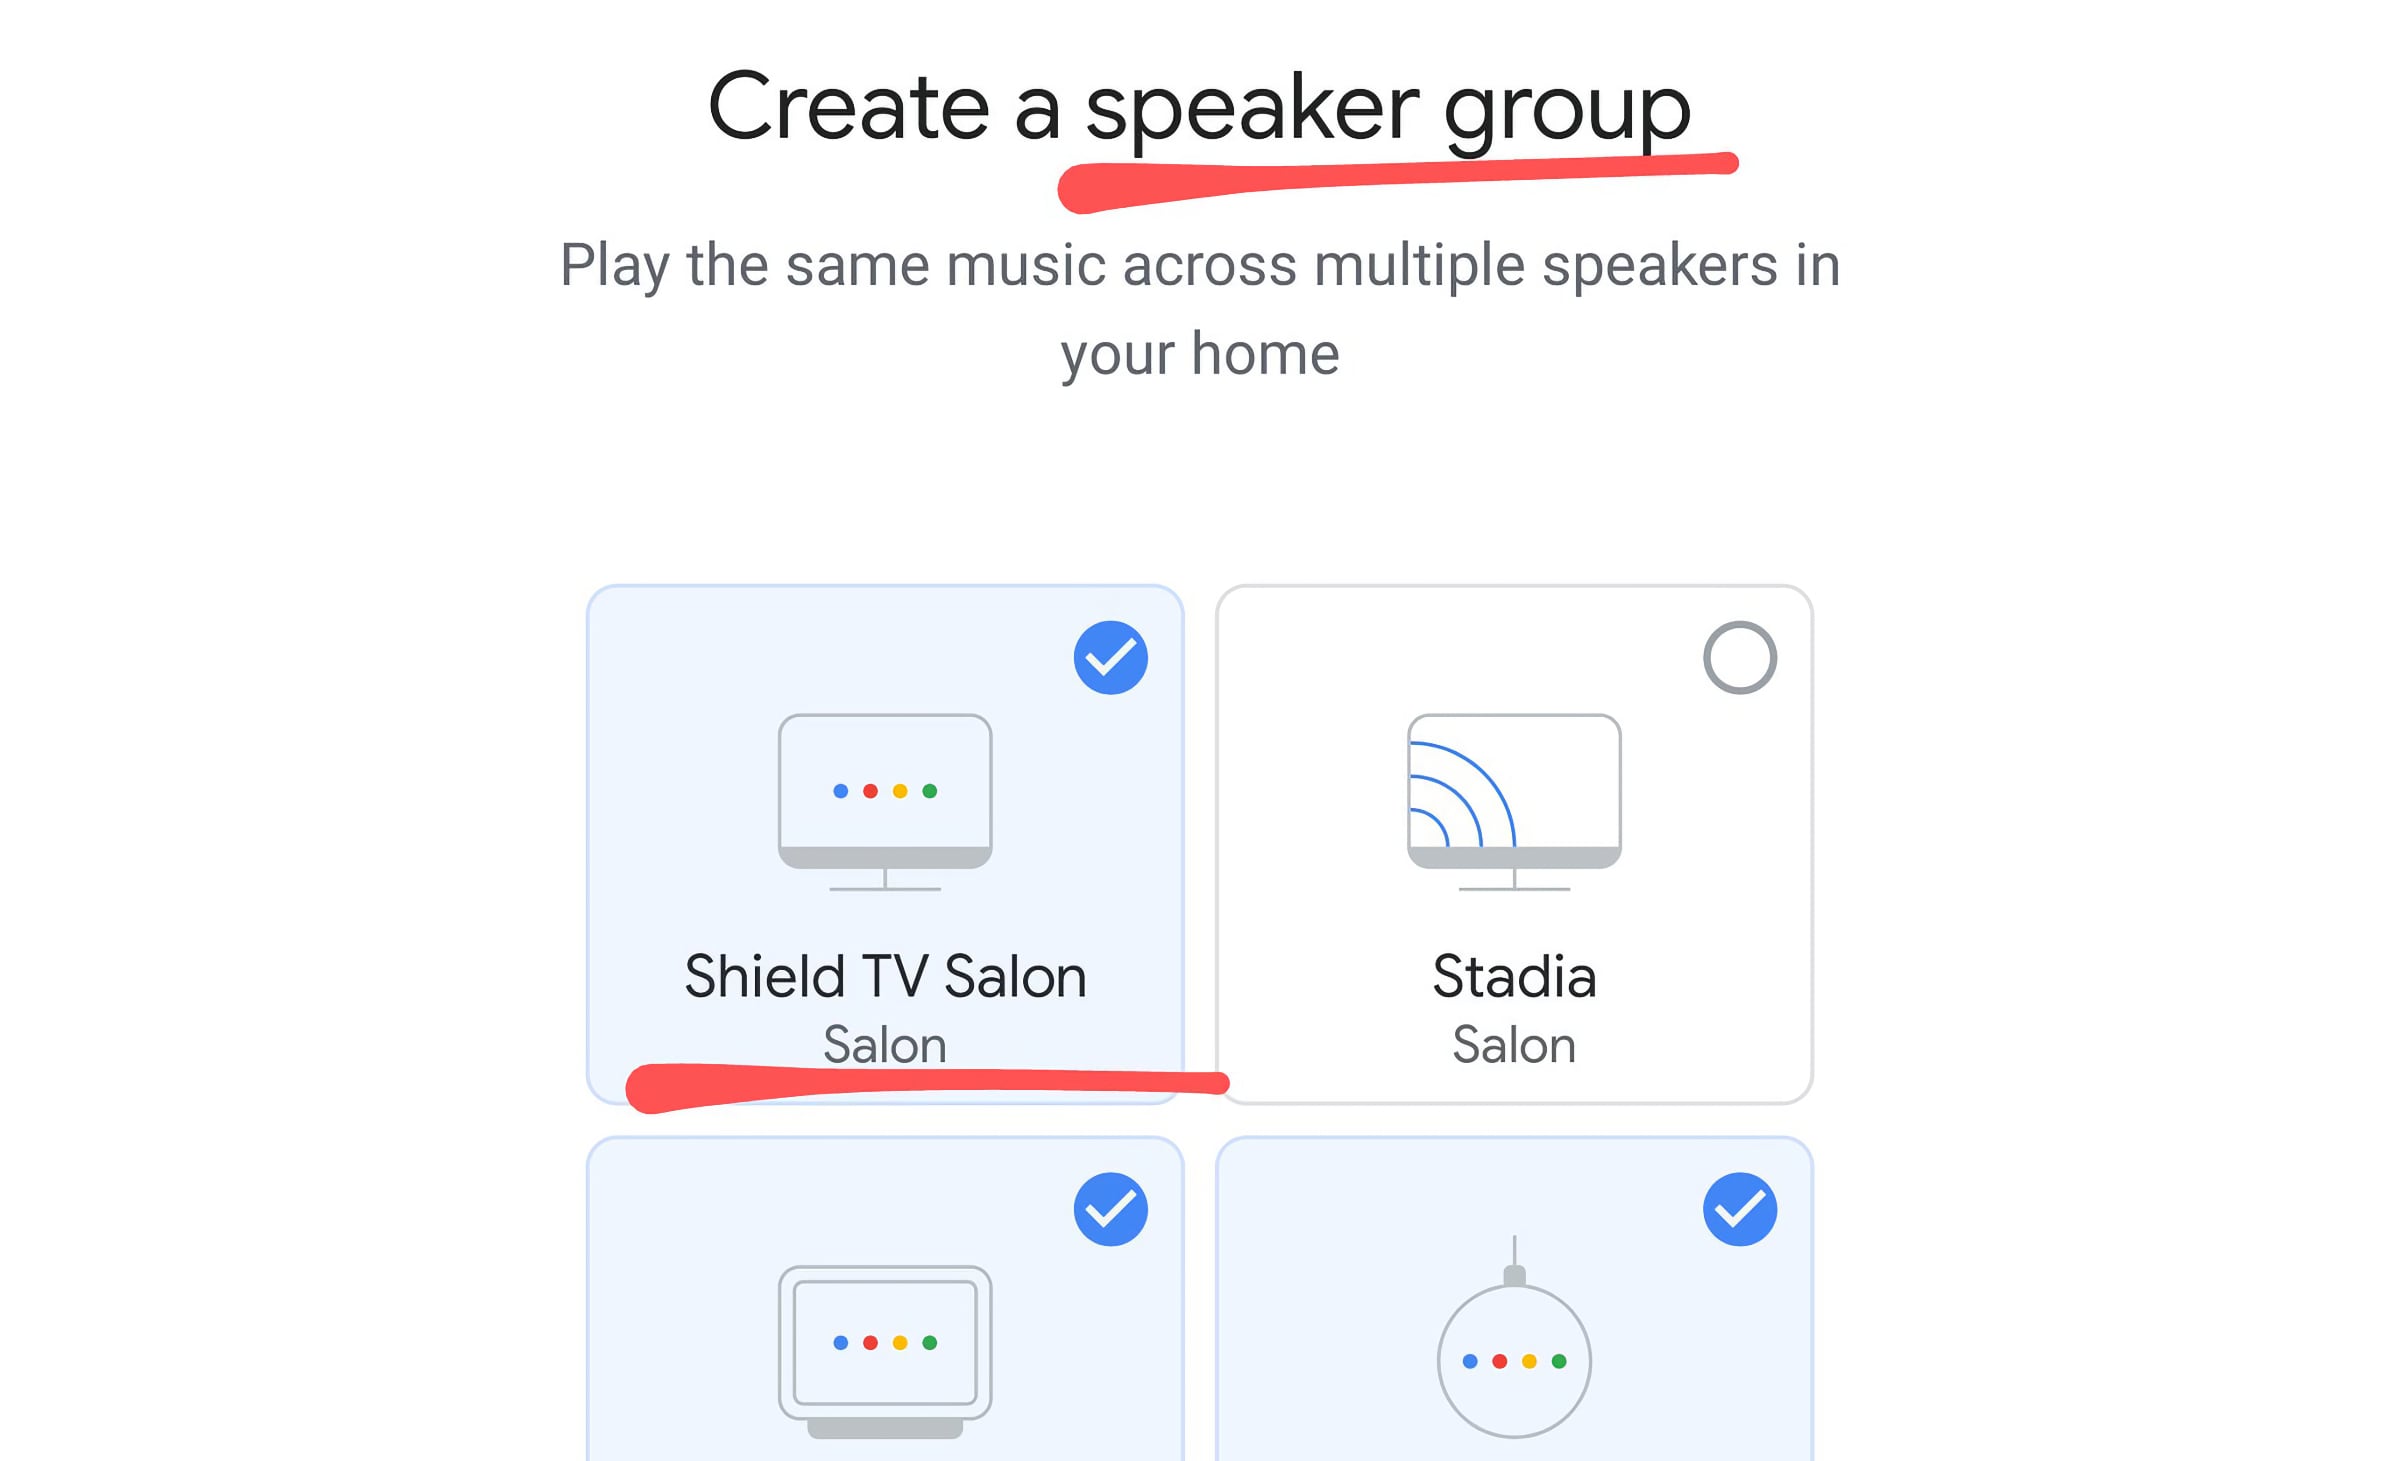 Android devices can now be added to Google speaker - FlatpanelsHD